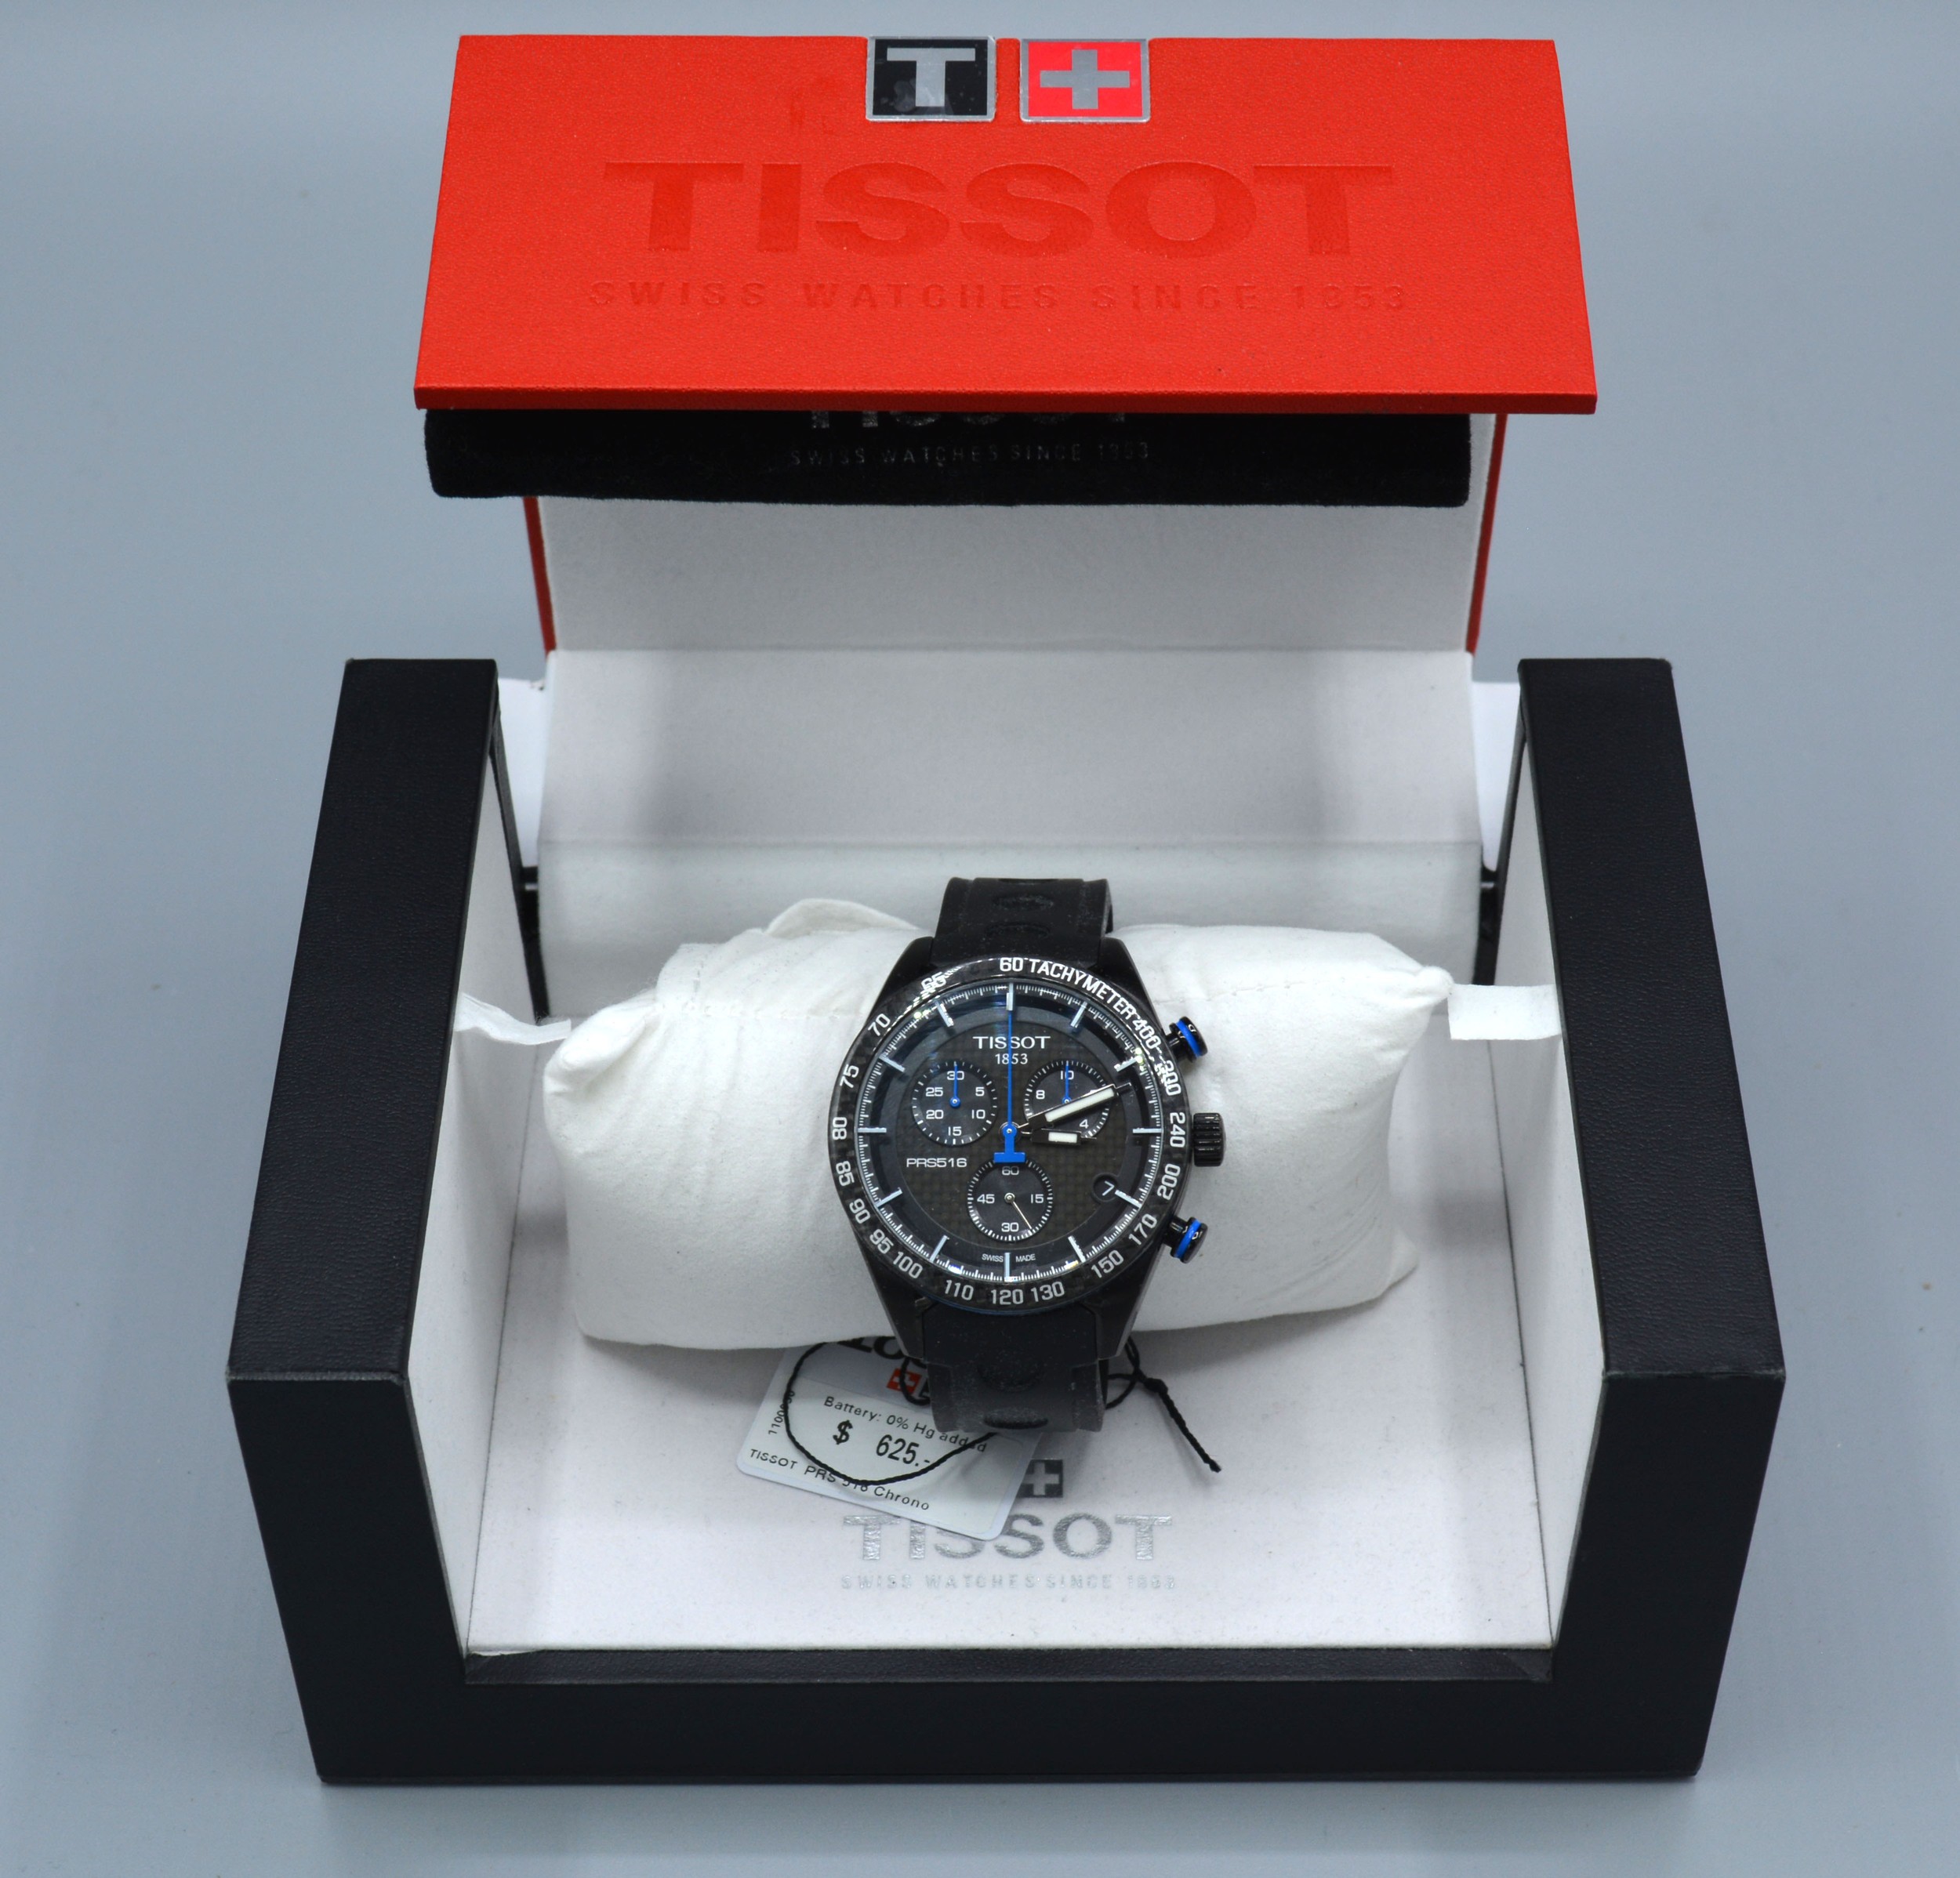 A Tissot PRS 516 Chronograph Wrist Watch with racing style strap complete with original box - Image 2 of 2